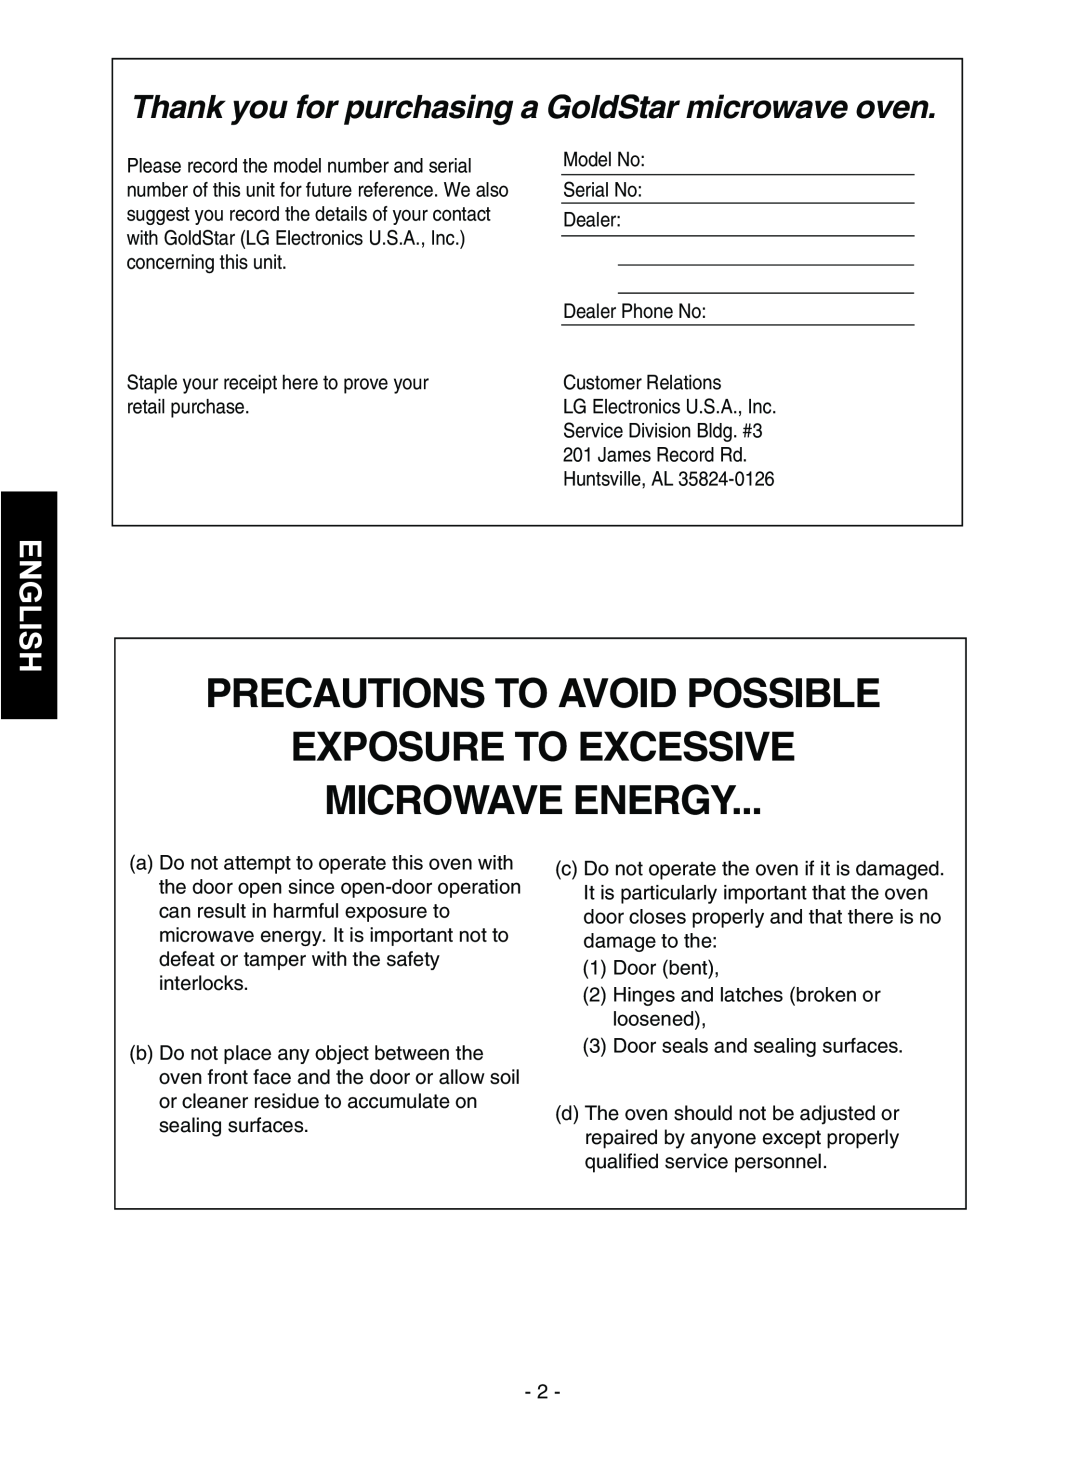 Goldstar MVH1615WW owner manual English, Precautions To Avoid Possible, Exposure To Excessive Microwave Energy 